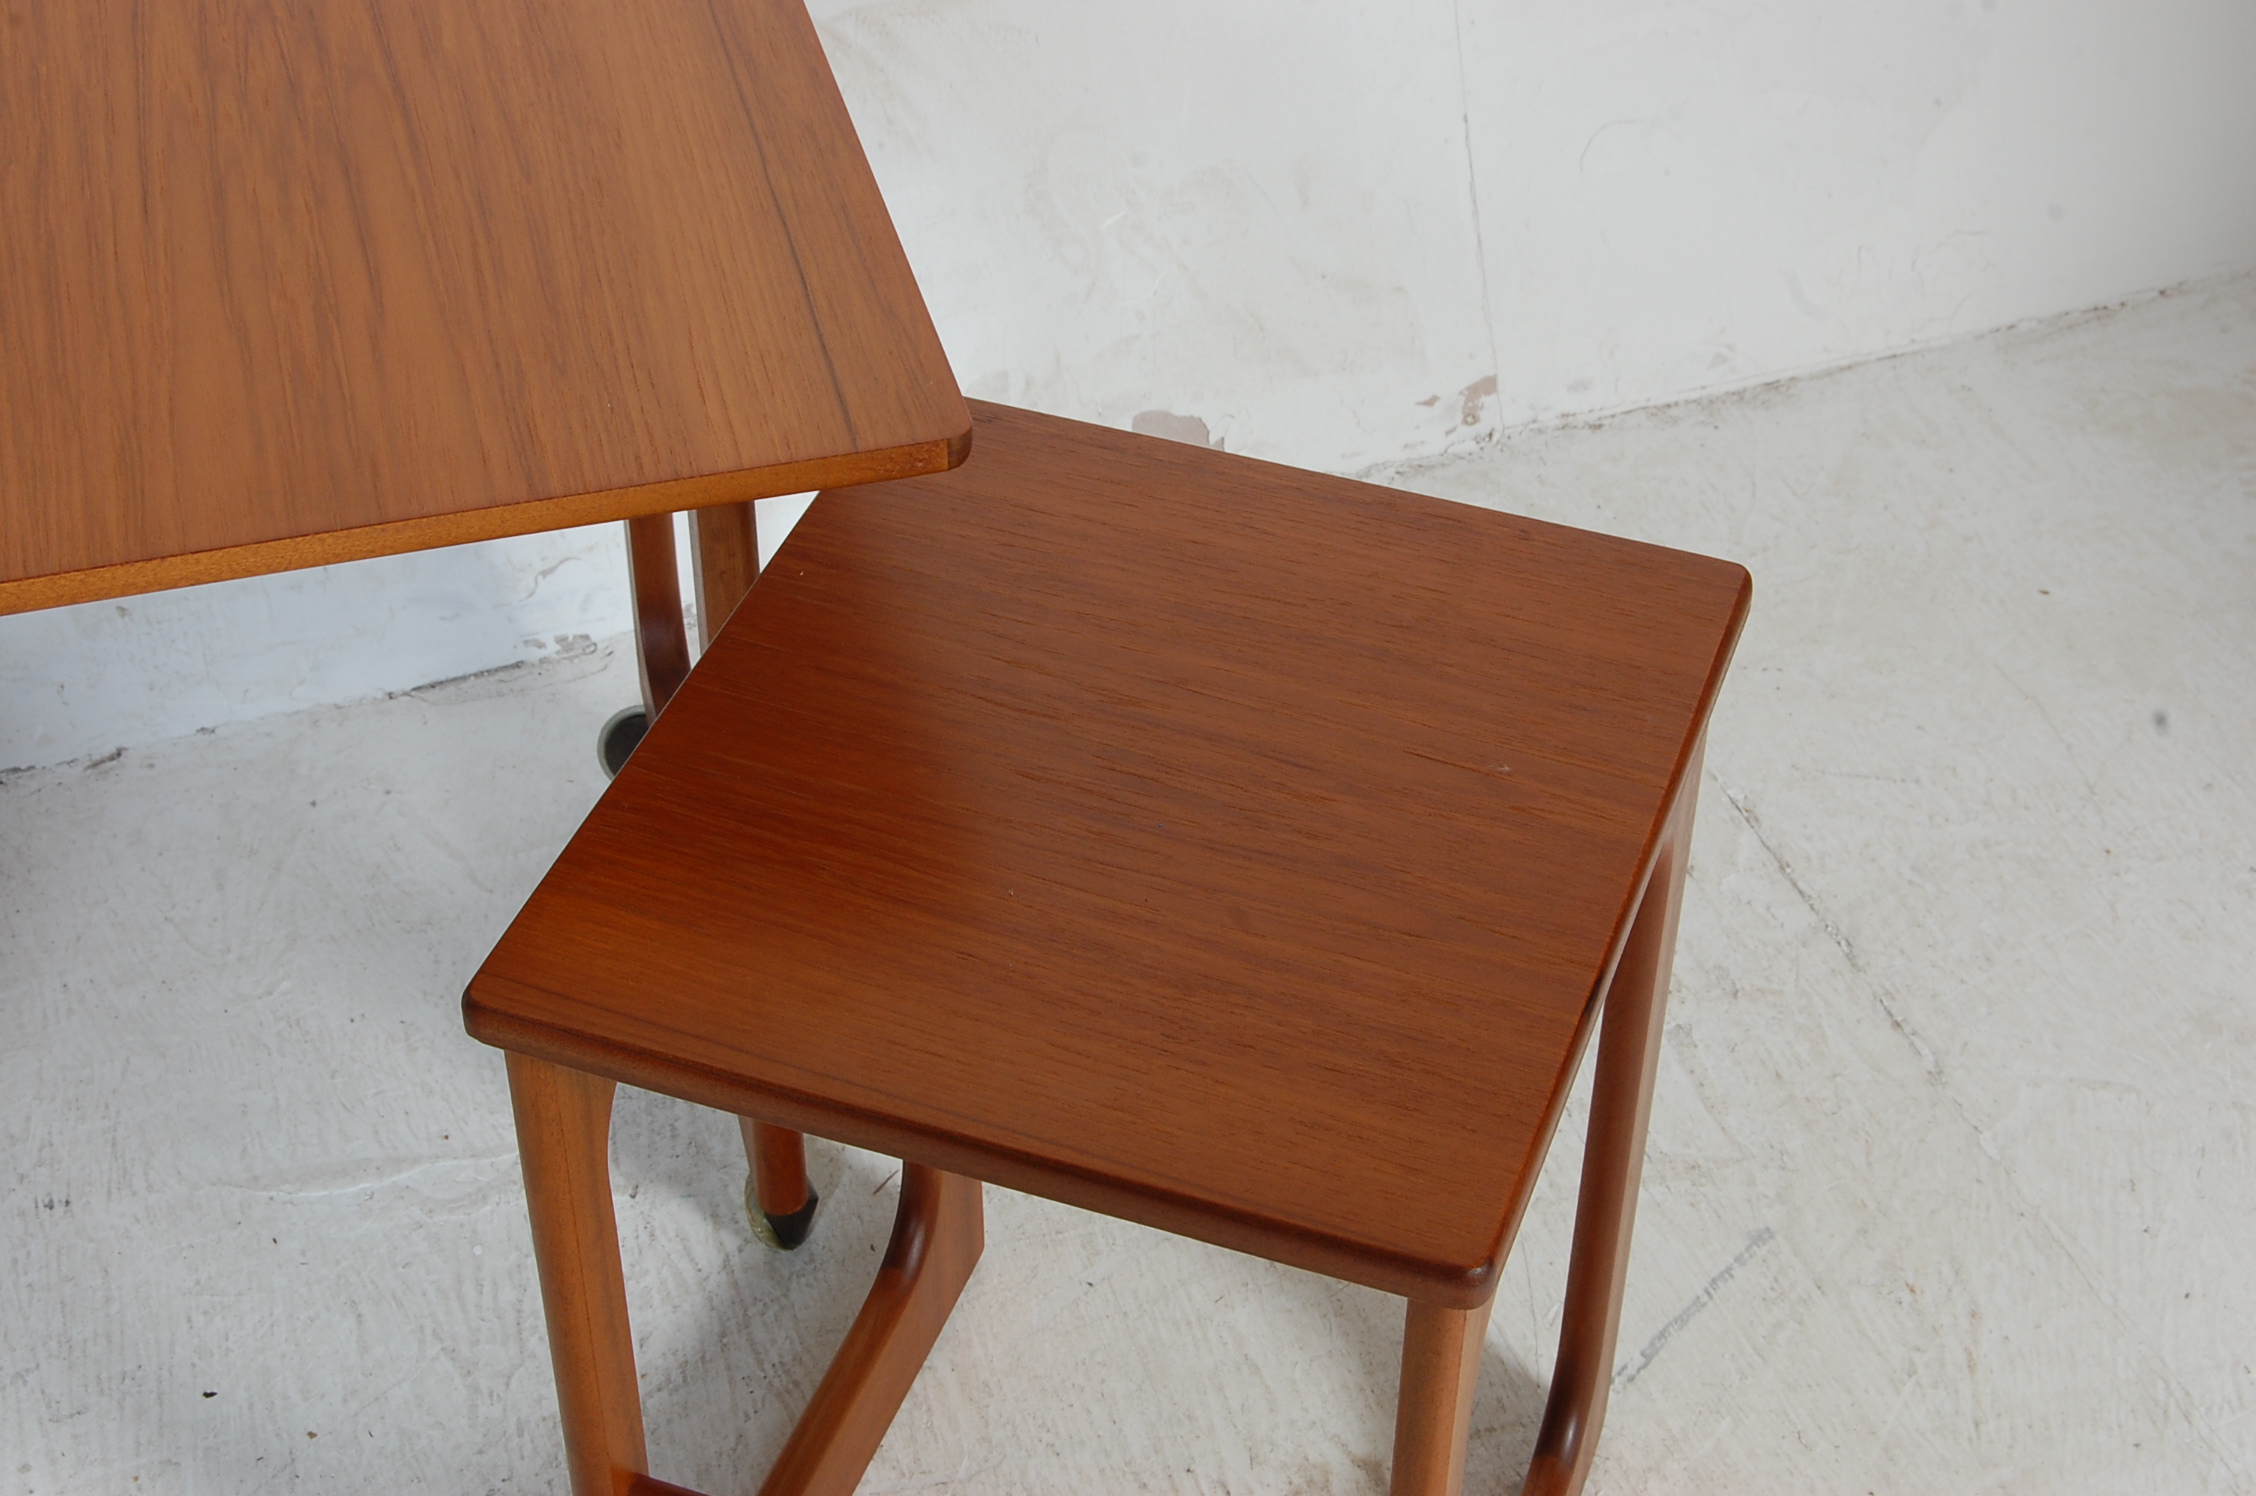 TEAK WOOD NEST OF TABLES BY MCINTOSH - Image 5 of 7